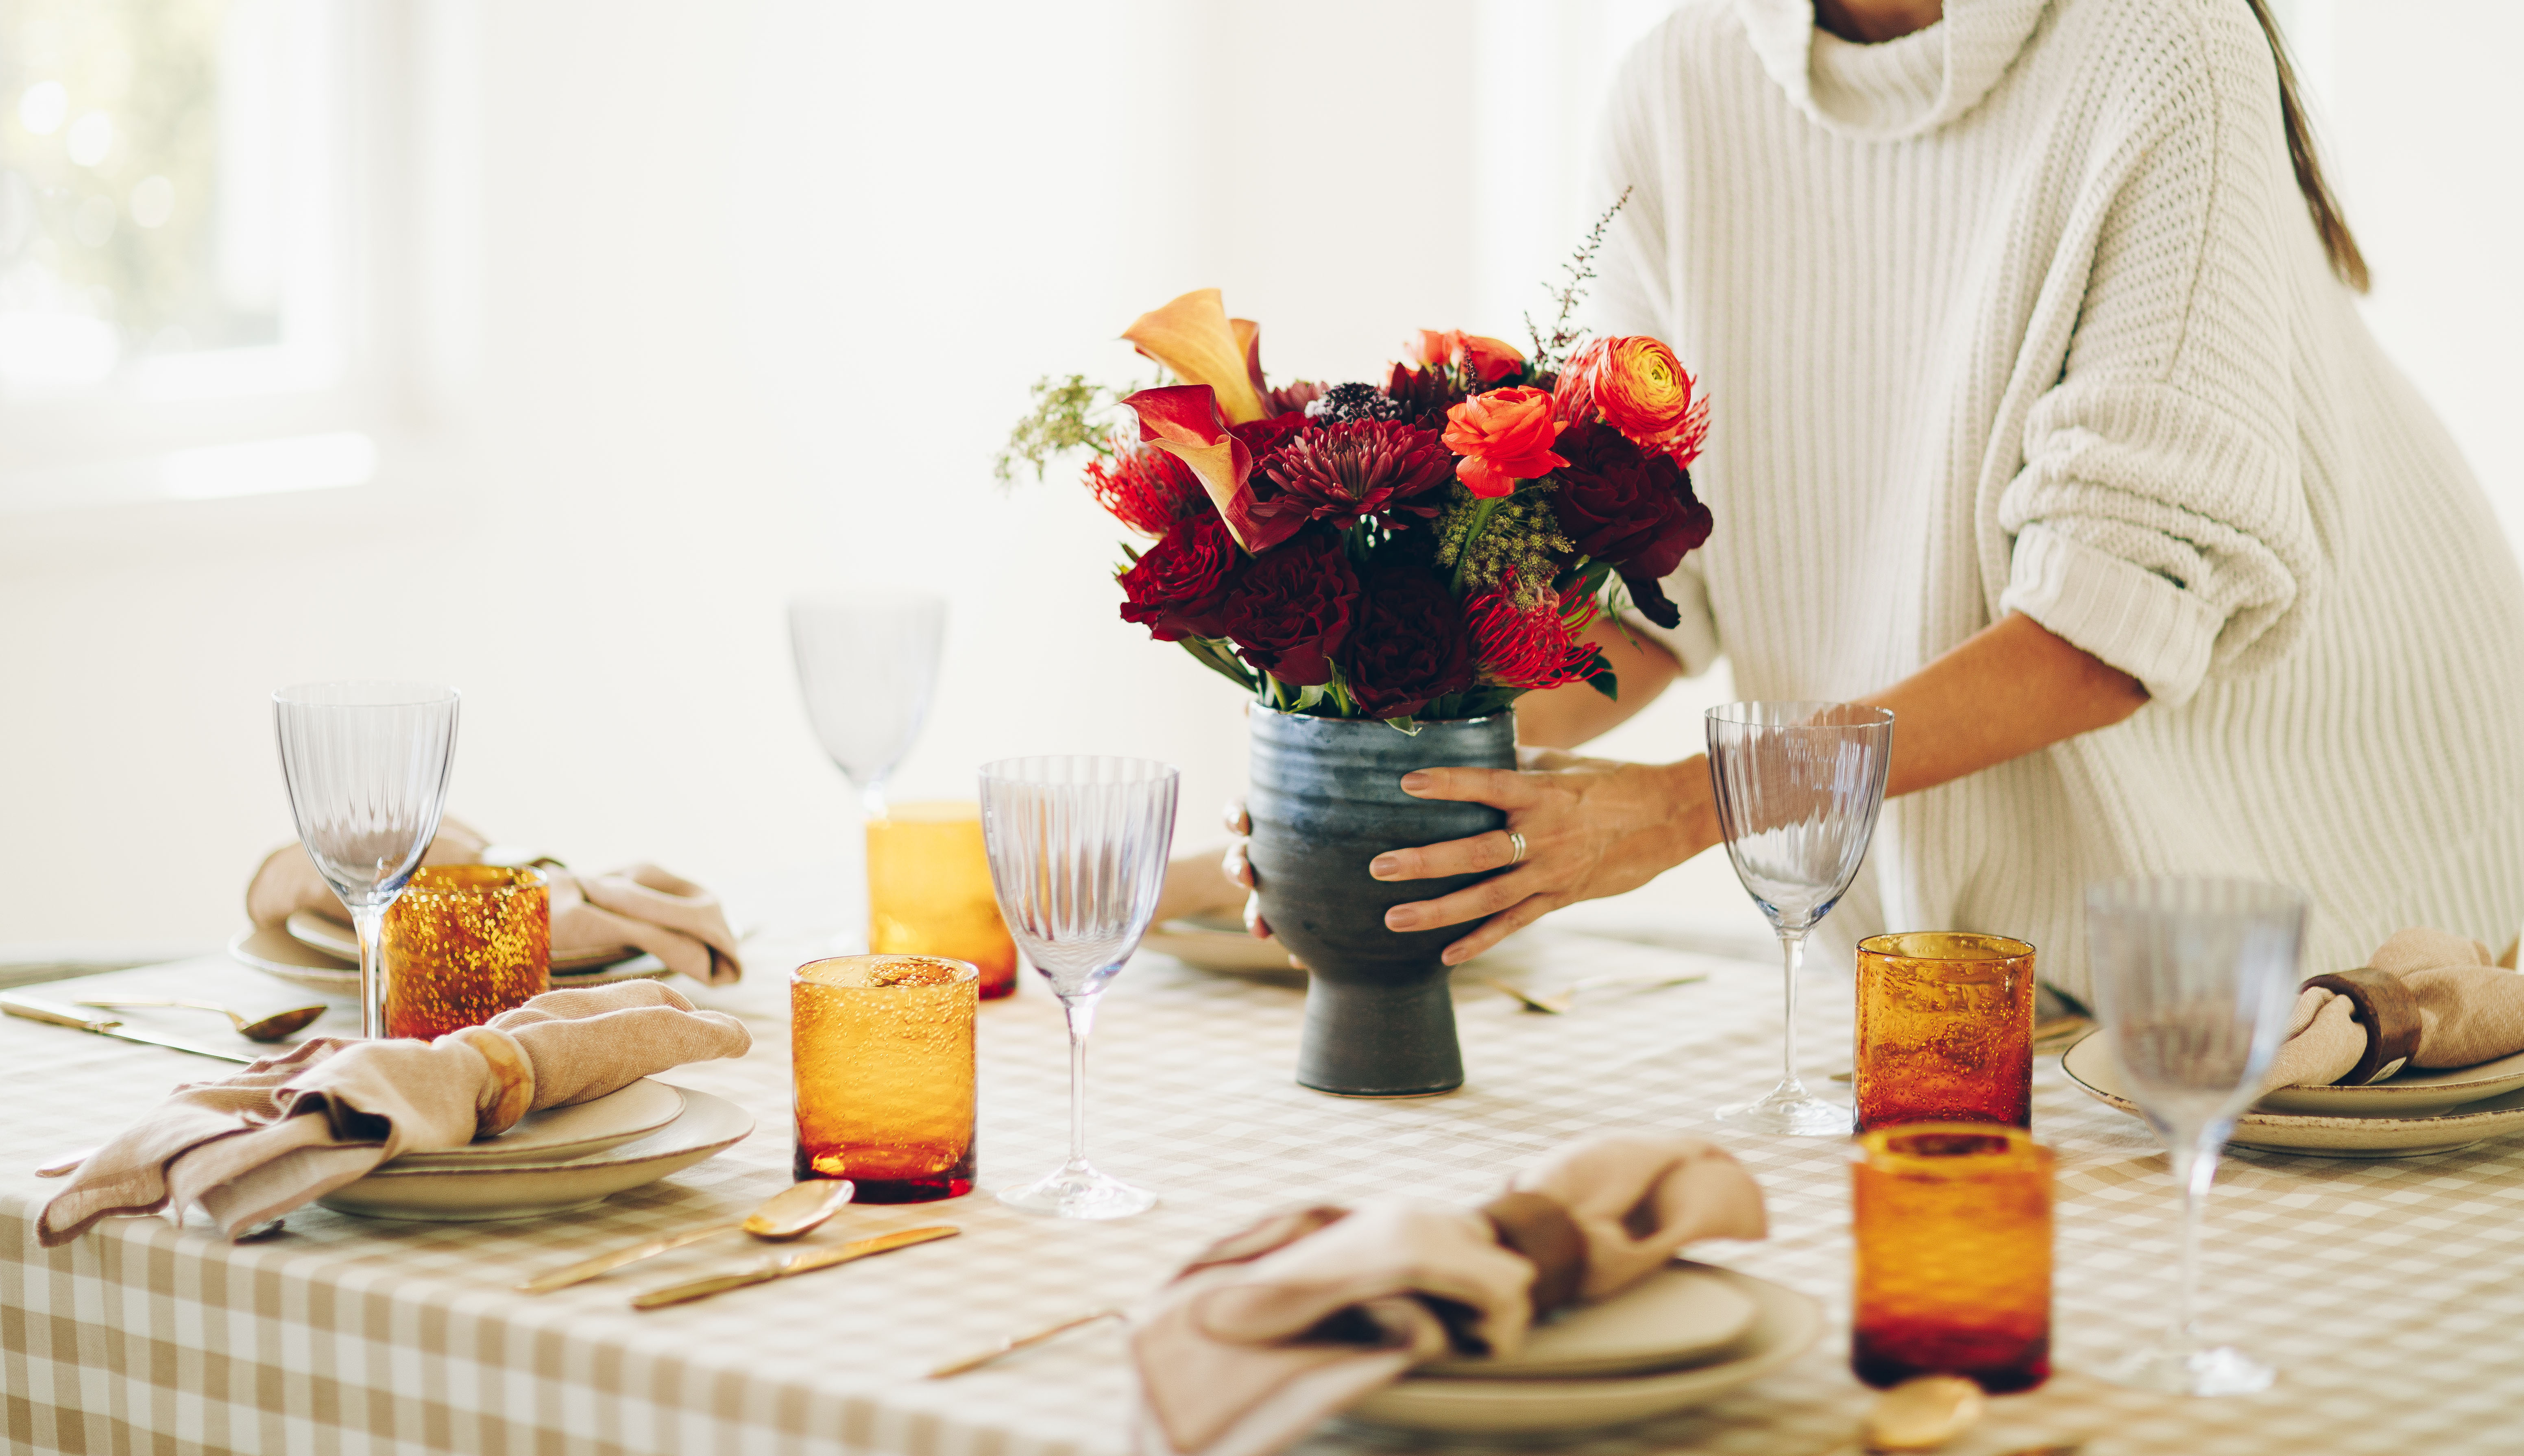 Floral mums centerpiece at decorated Thanksgiving table